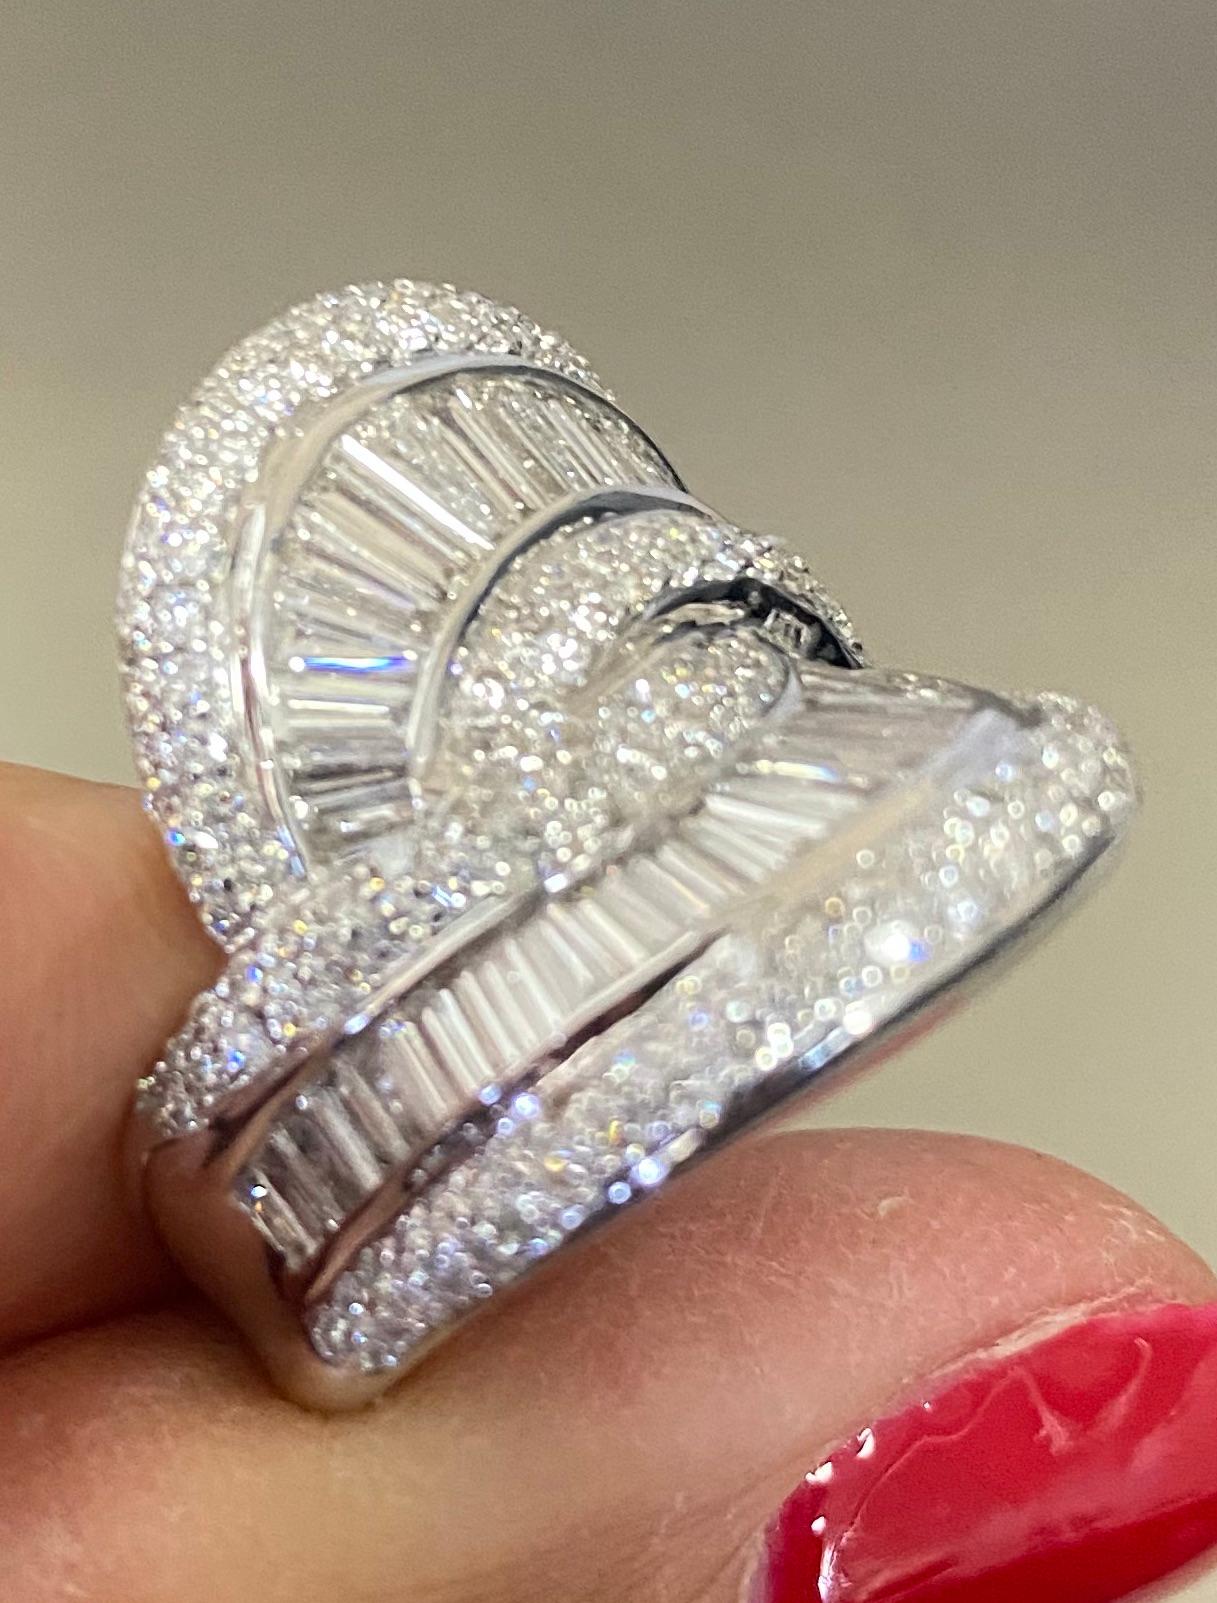 Lady's 18k Diamond Baguette Diamond Cocktail Ring 3.73 Carats
The diamond cocktail ring is a statement that expands 1 inch in length. The edges fold upward, giving an exciting contour for the call to showcase the diamonds. The width of the ring is 1